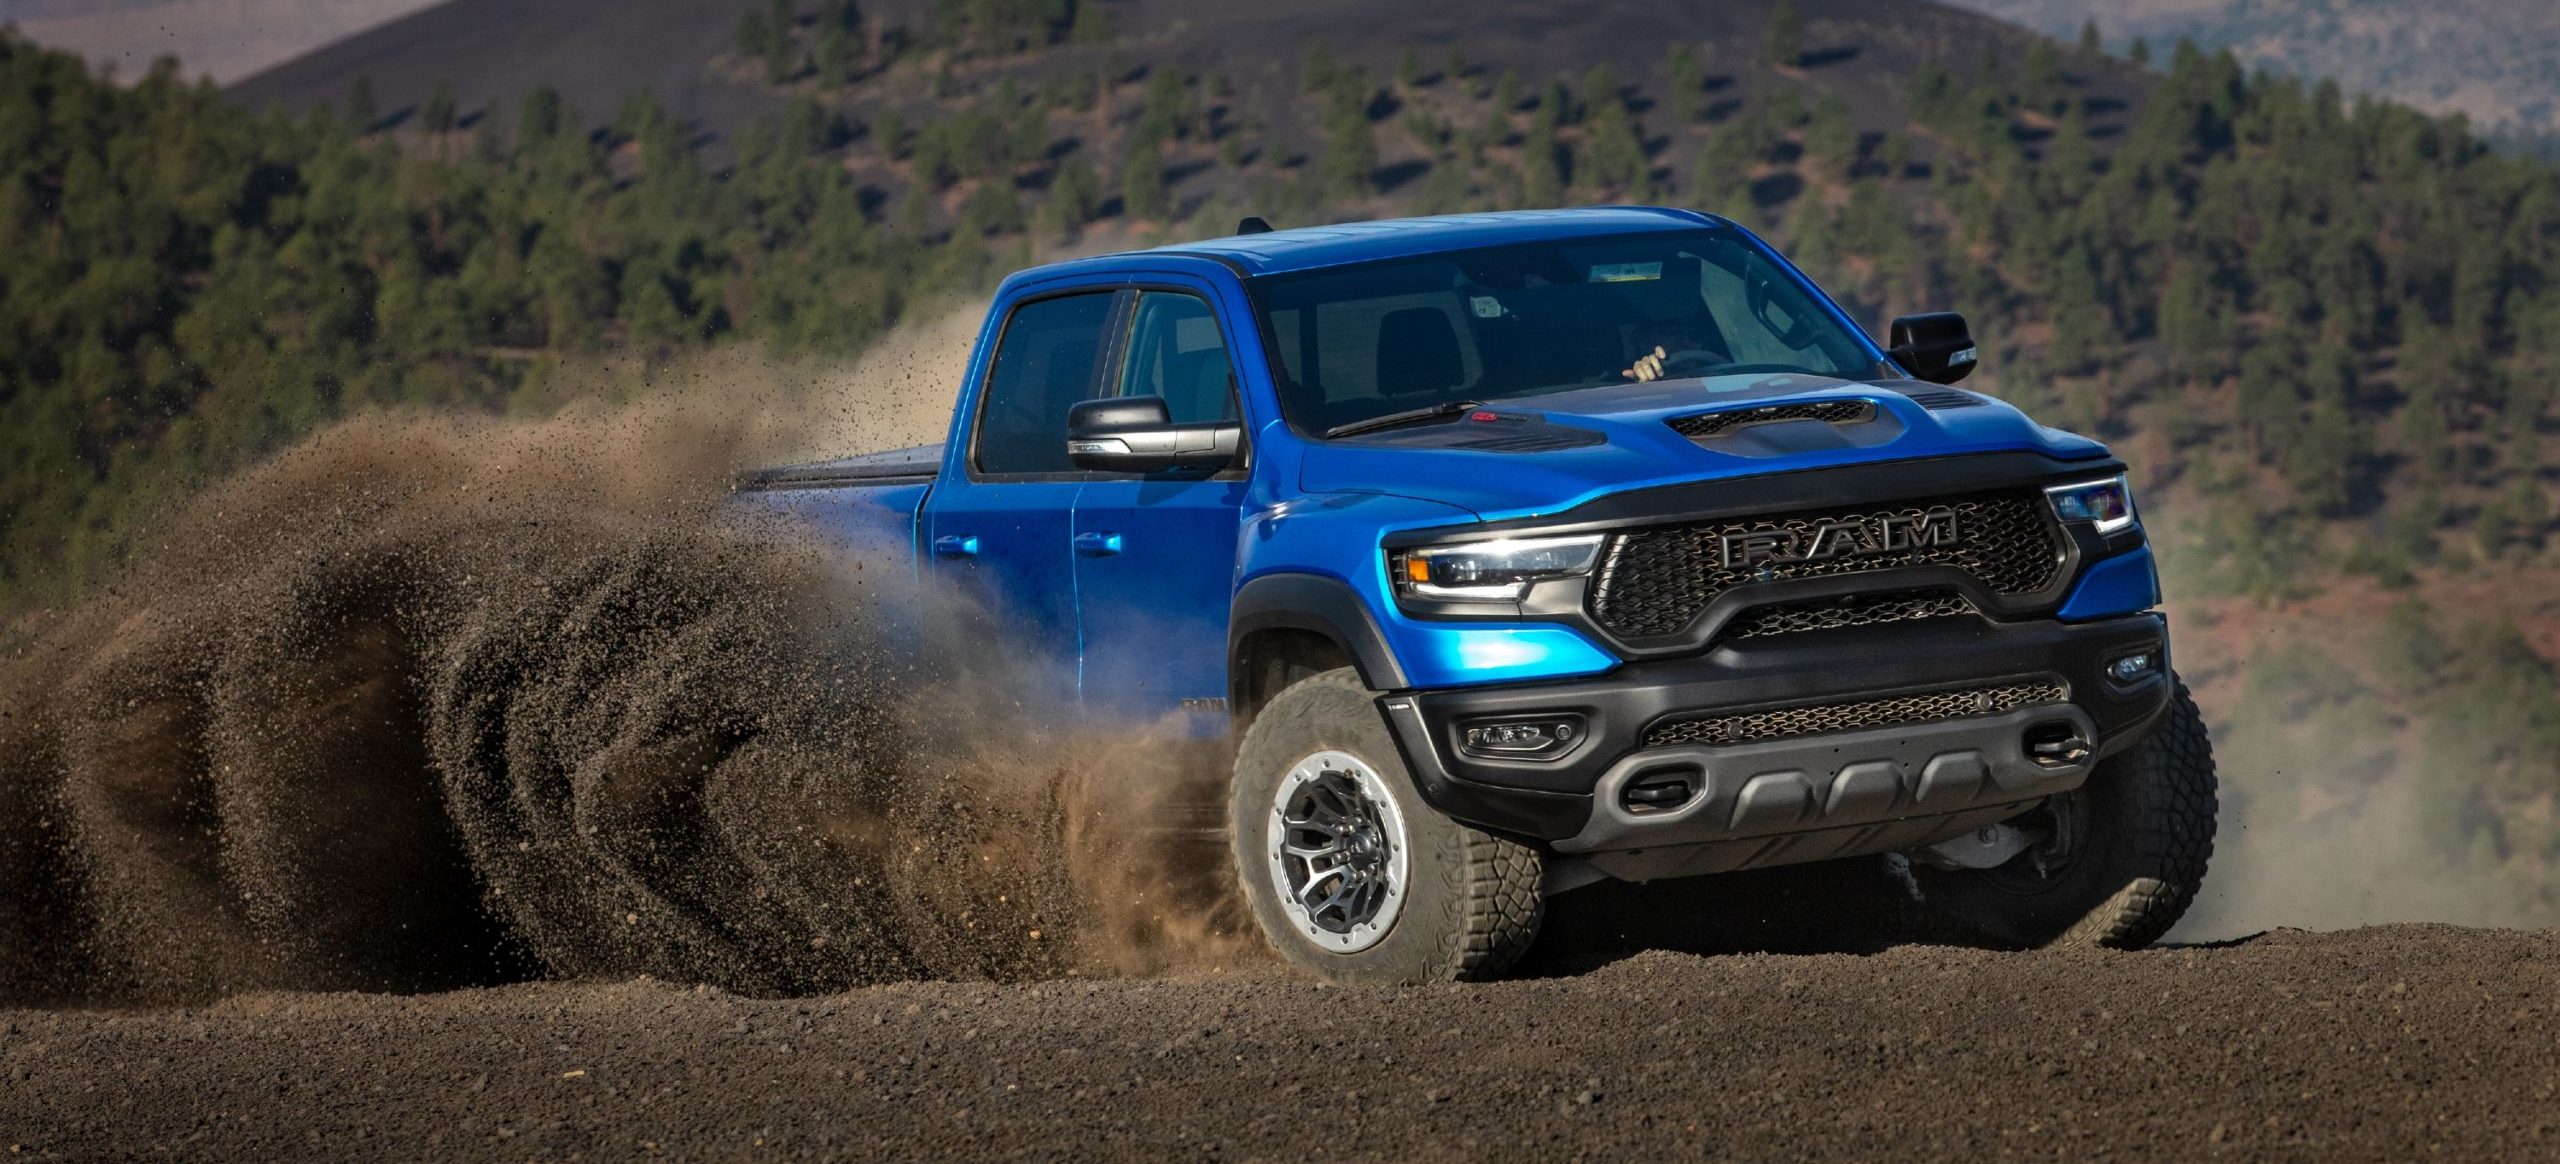 2023 Ram Trucks Are Getting a Tech Upgrade: Here's What is Coming Up Soon! Fast Lane Truck